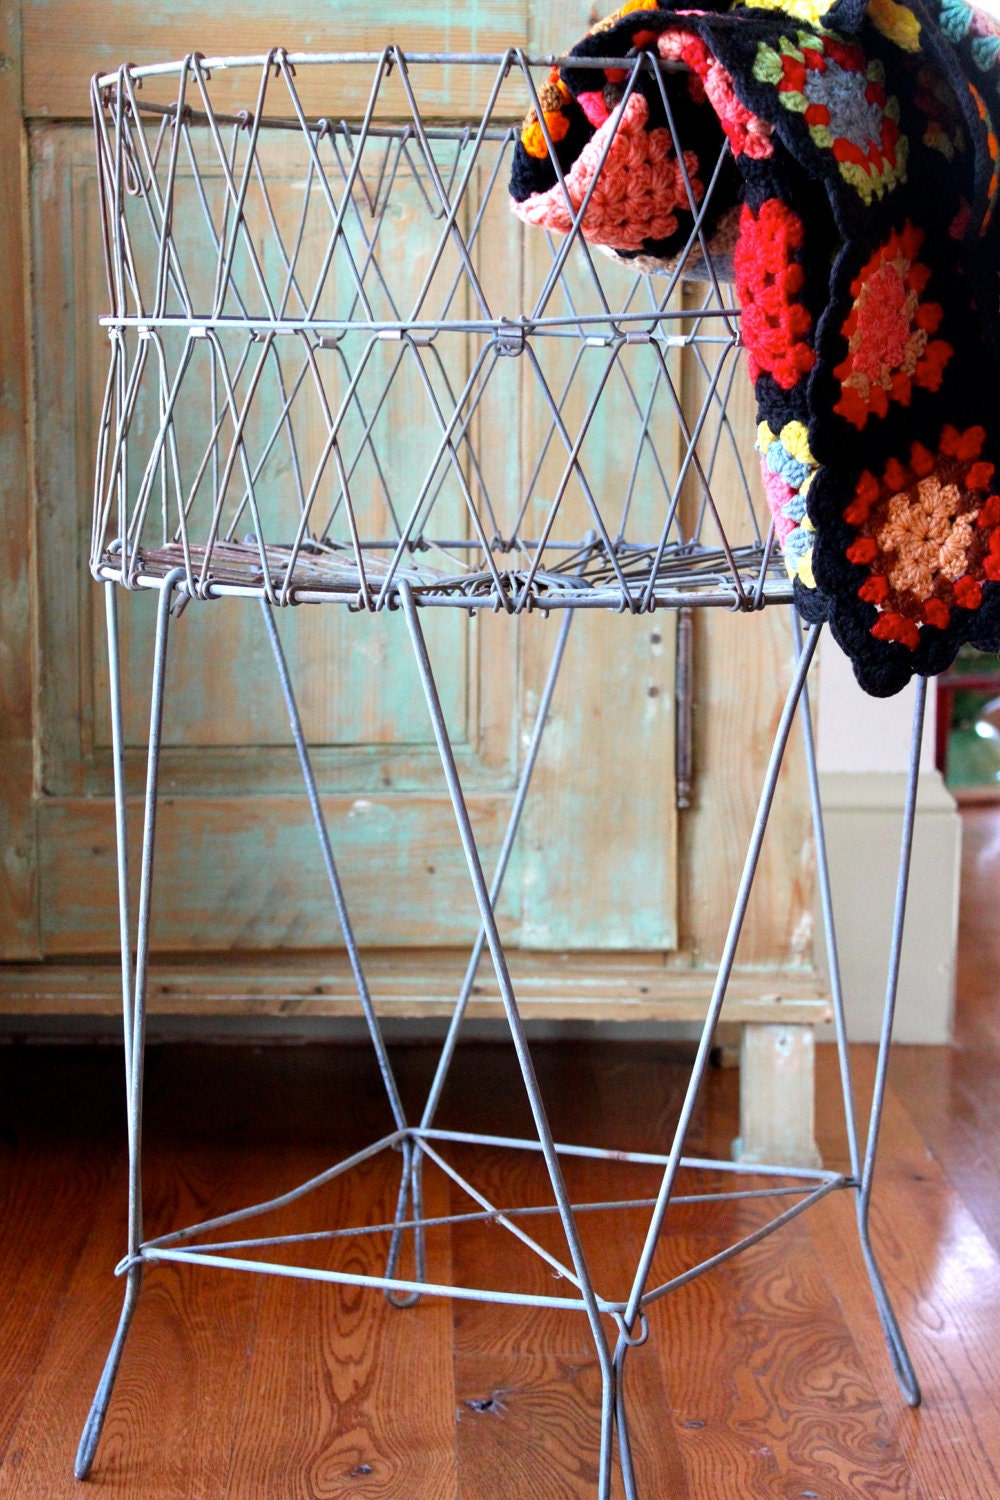 Vintage wire laundry collapsable basket.